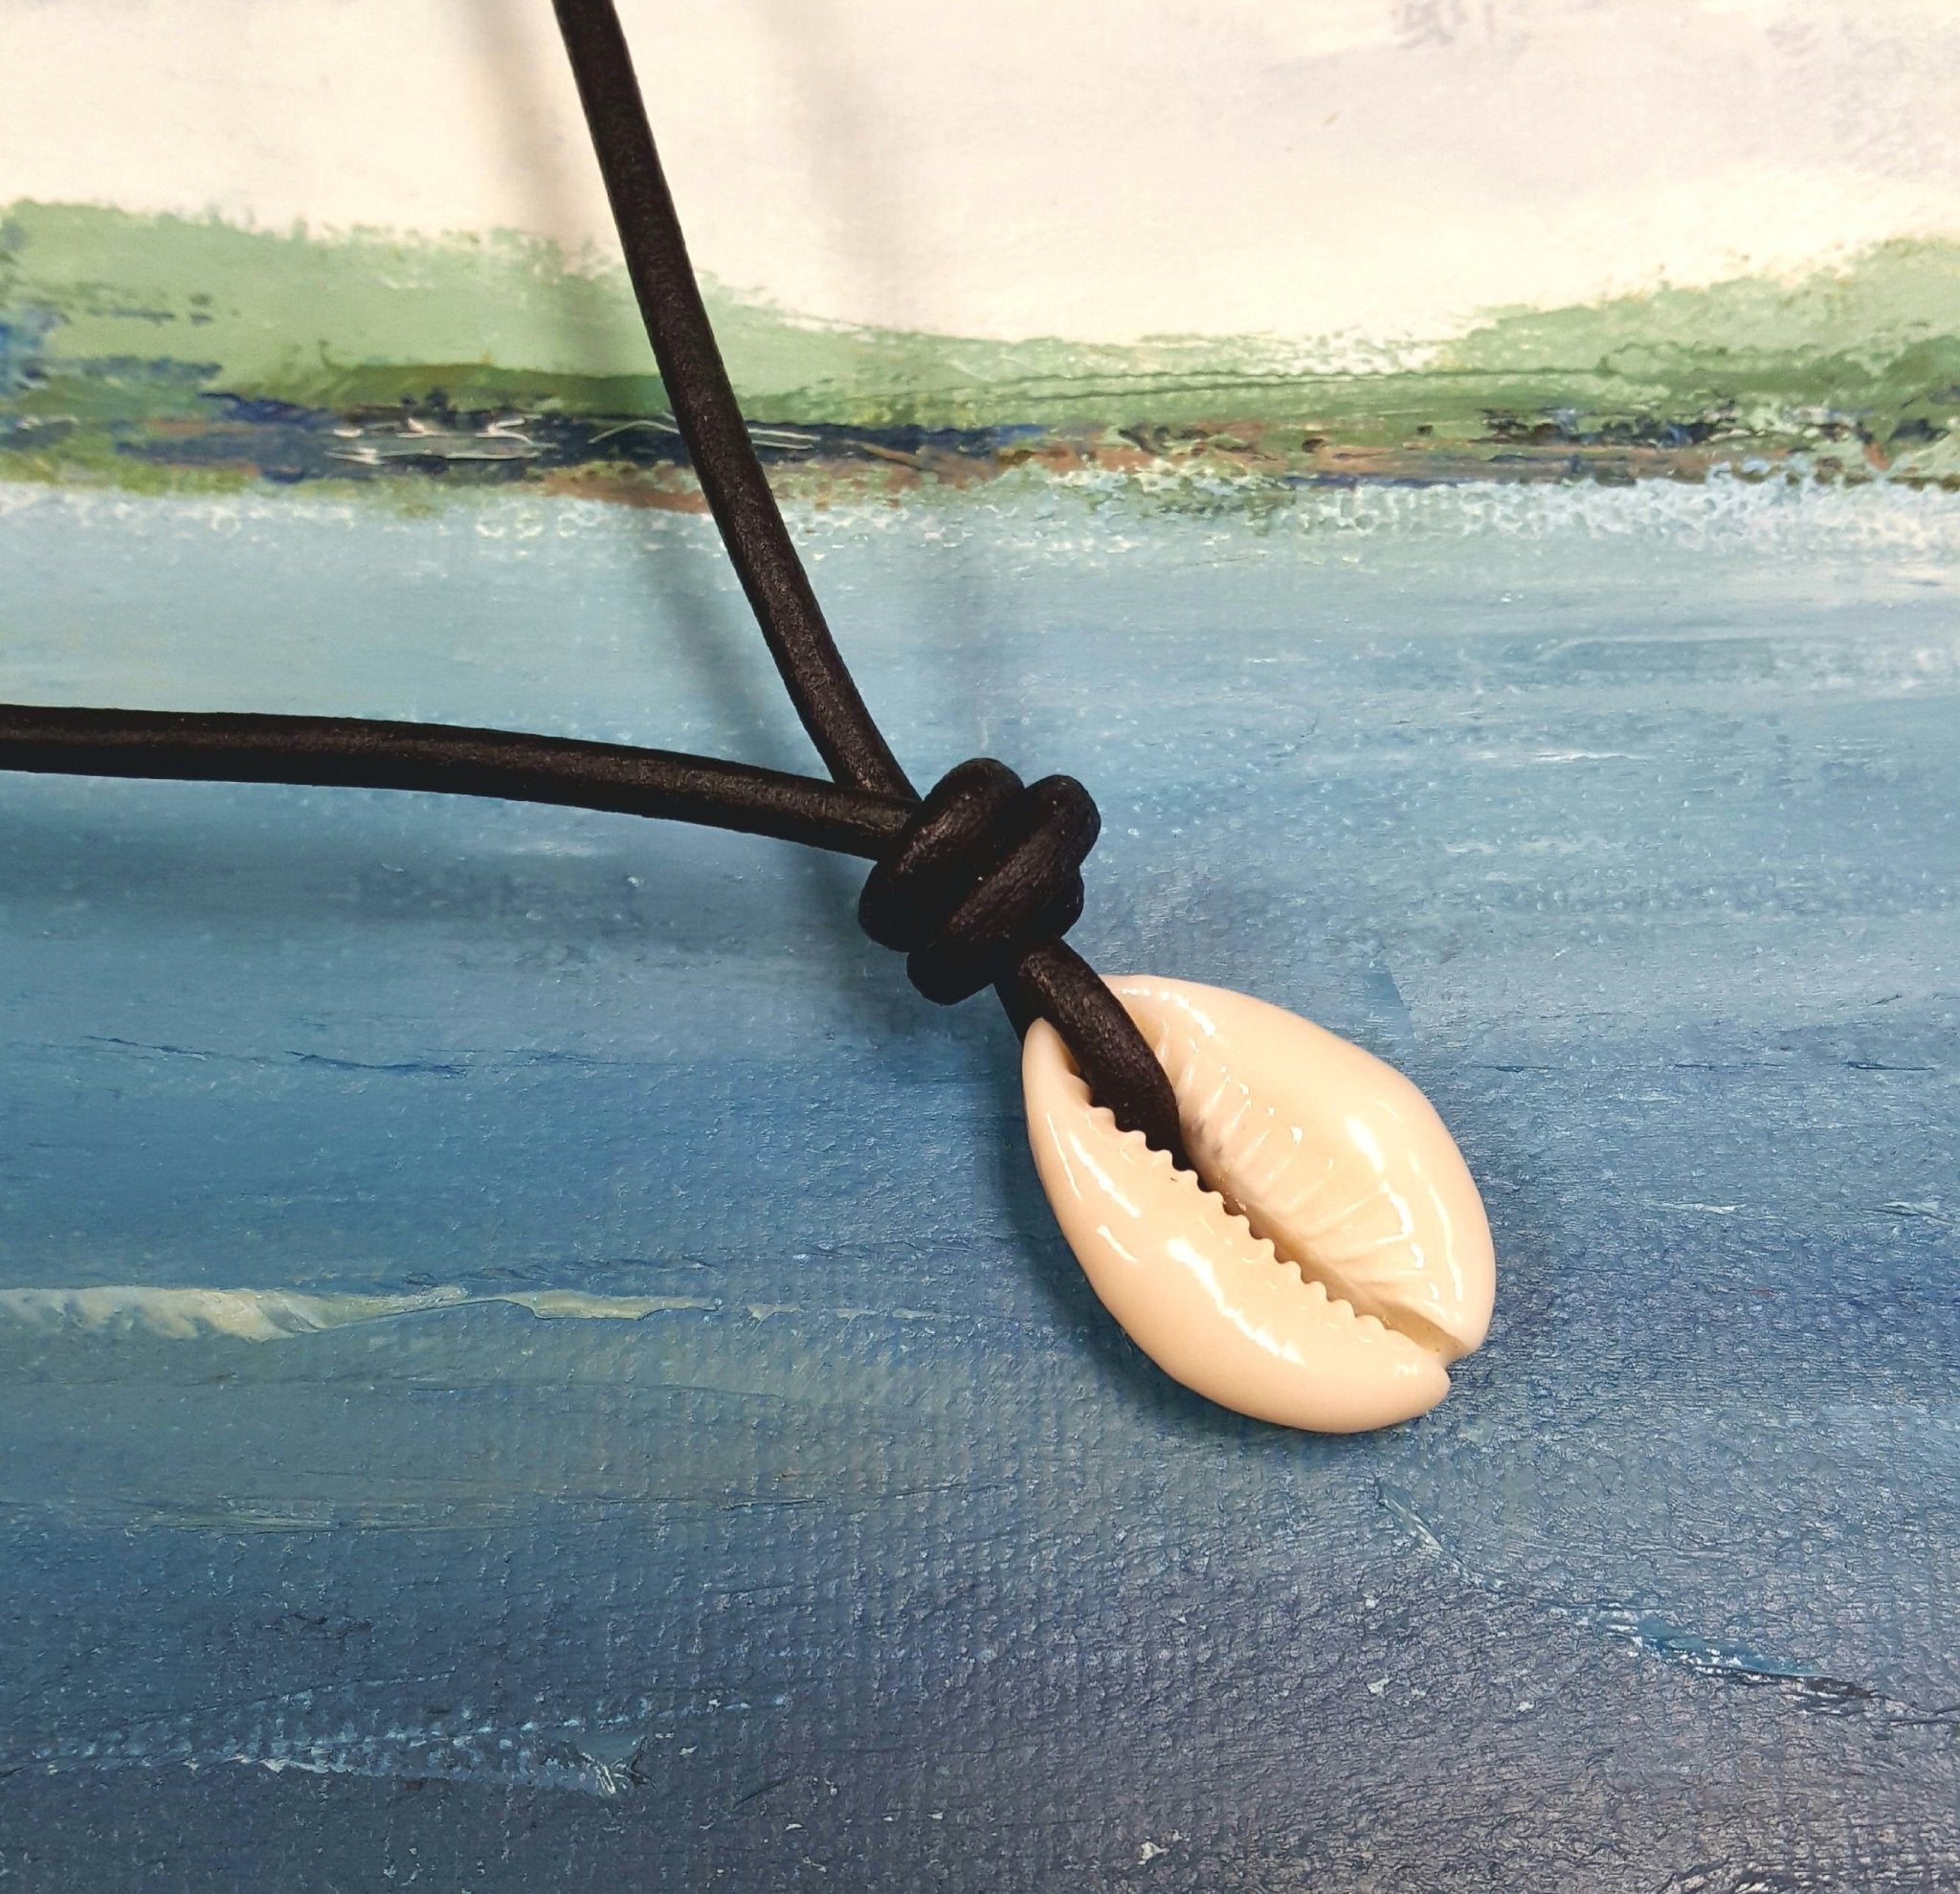 Cowrie Shell Leather Cord Necklace By Posh Totty Designs